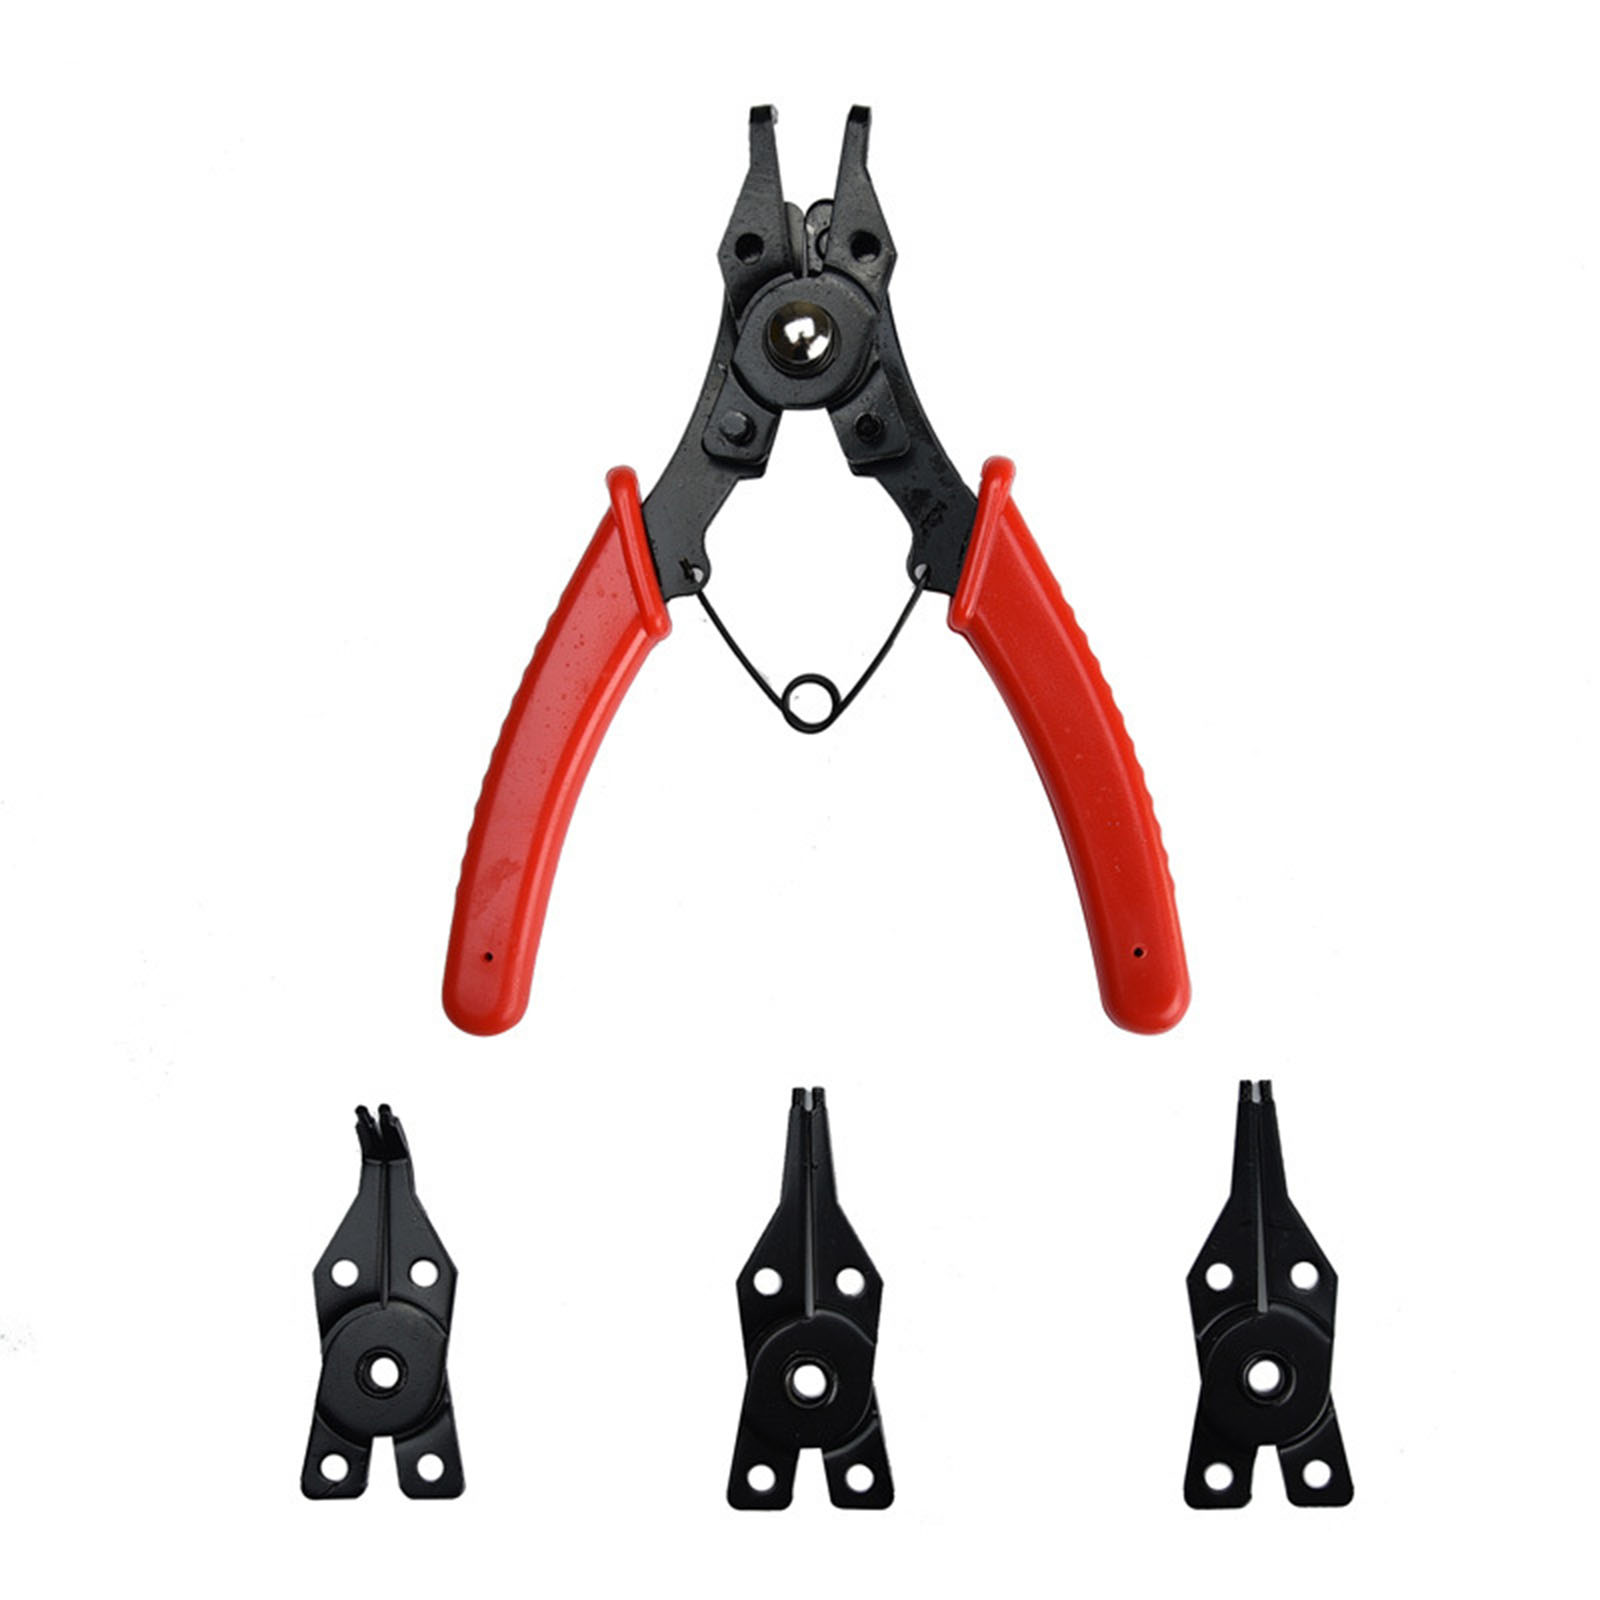 4-in-1 Multifunctional Snap-Ring Pliers Multi Crimp Tool Ring Remover Retaining Circlip Pliers Yellow